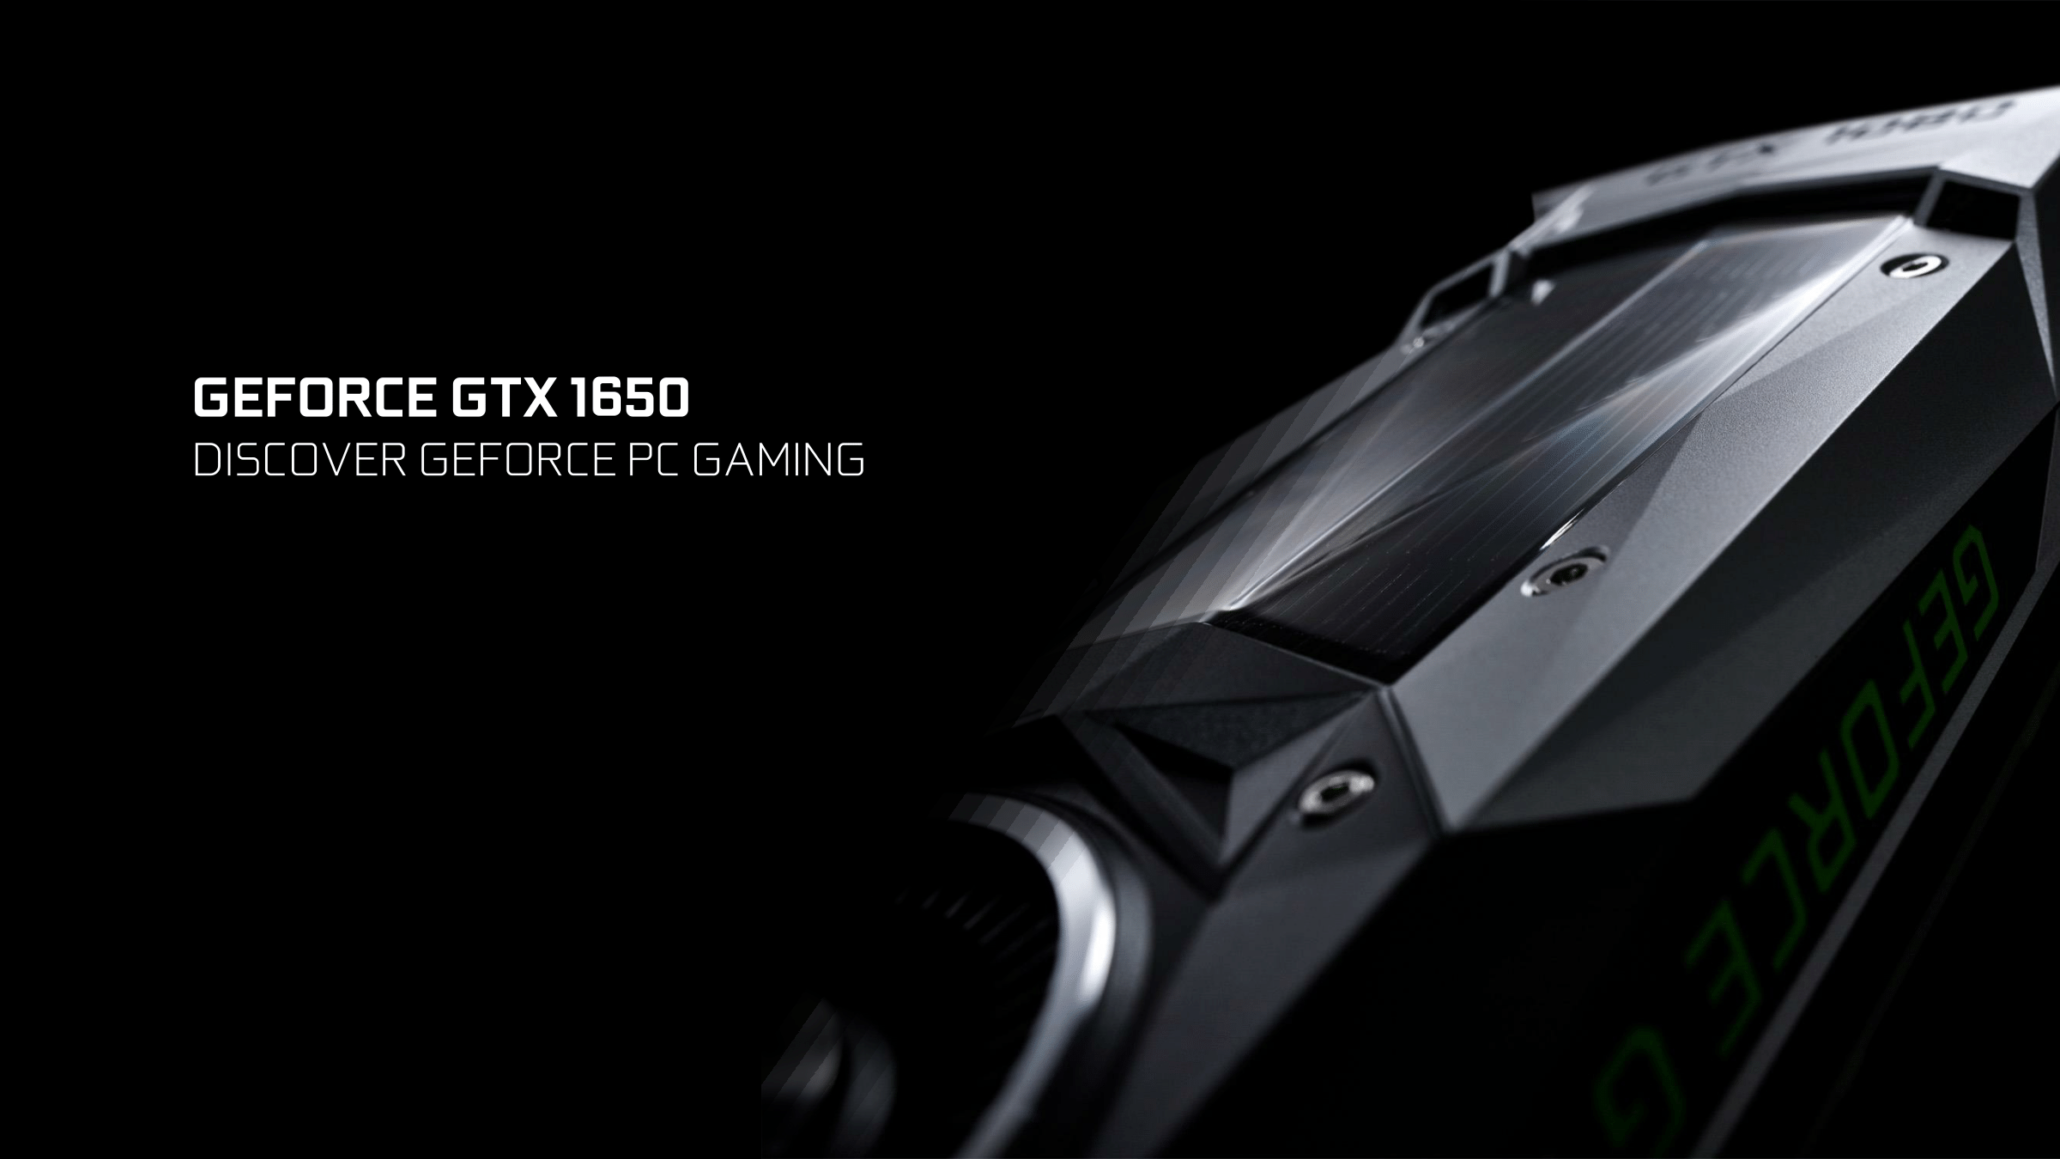 NVIDIA GeForce GTX 1650 Graphics Card With 4 GB VRAM Confirmed